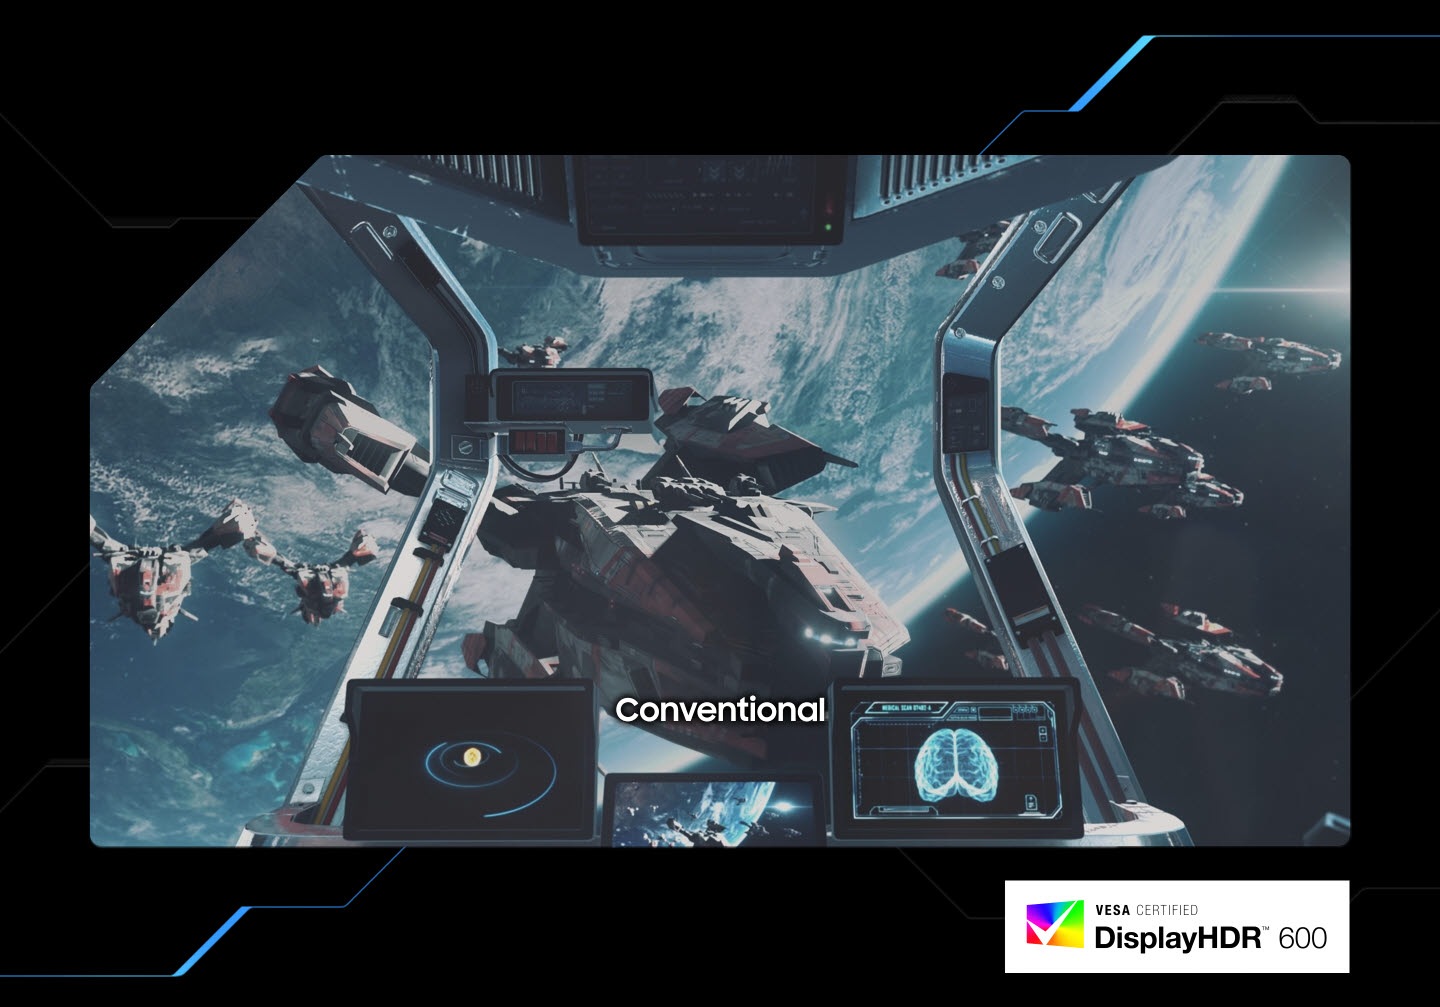 On the Conventional screen, a spaceship can be seen. Switching to VESA Display HDR 600 makes the screen sharper and reveals more detail around the dark areas of the spaceship. On the bottom right of the screen is the VESA Certified DisplayHDR 600 logo.